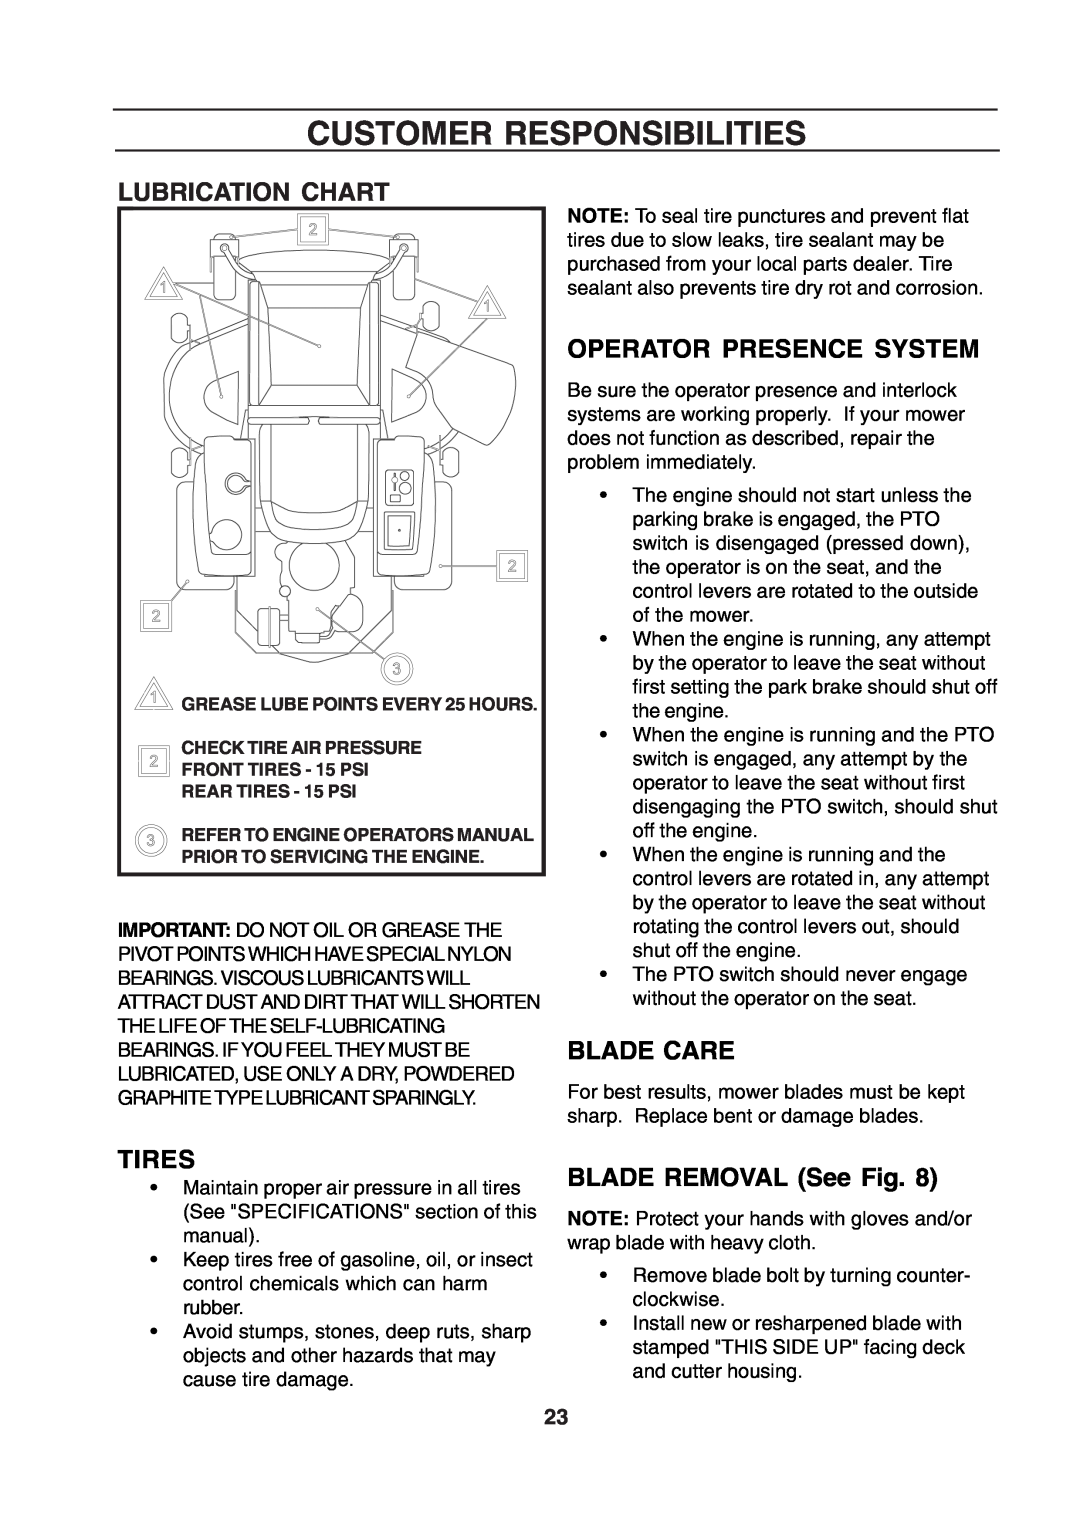 Husqvarna CZE 4818 manual Lubrication Chart, Operator Presence System, Blade Care, Tires, BLADE REMOVAL See Fig 